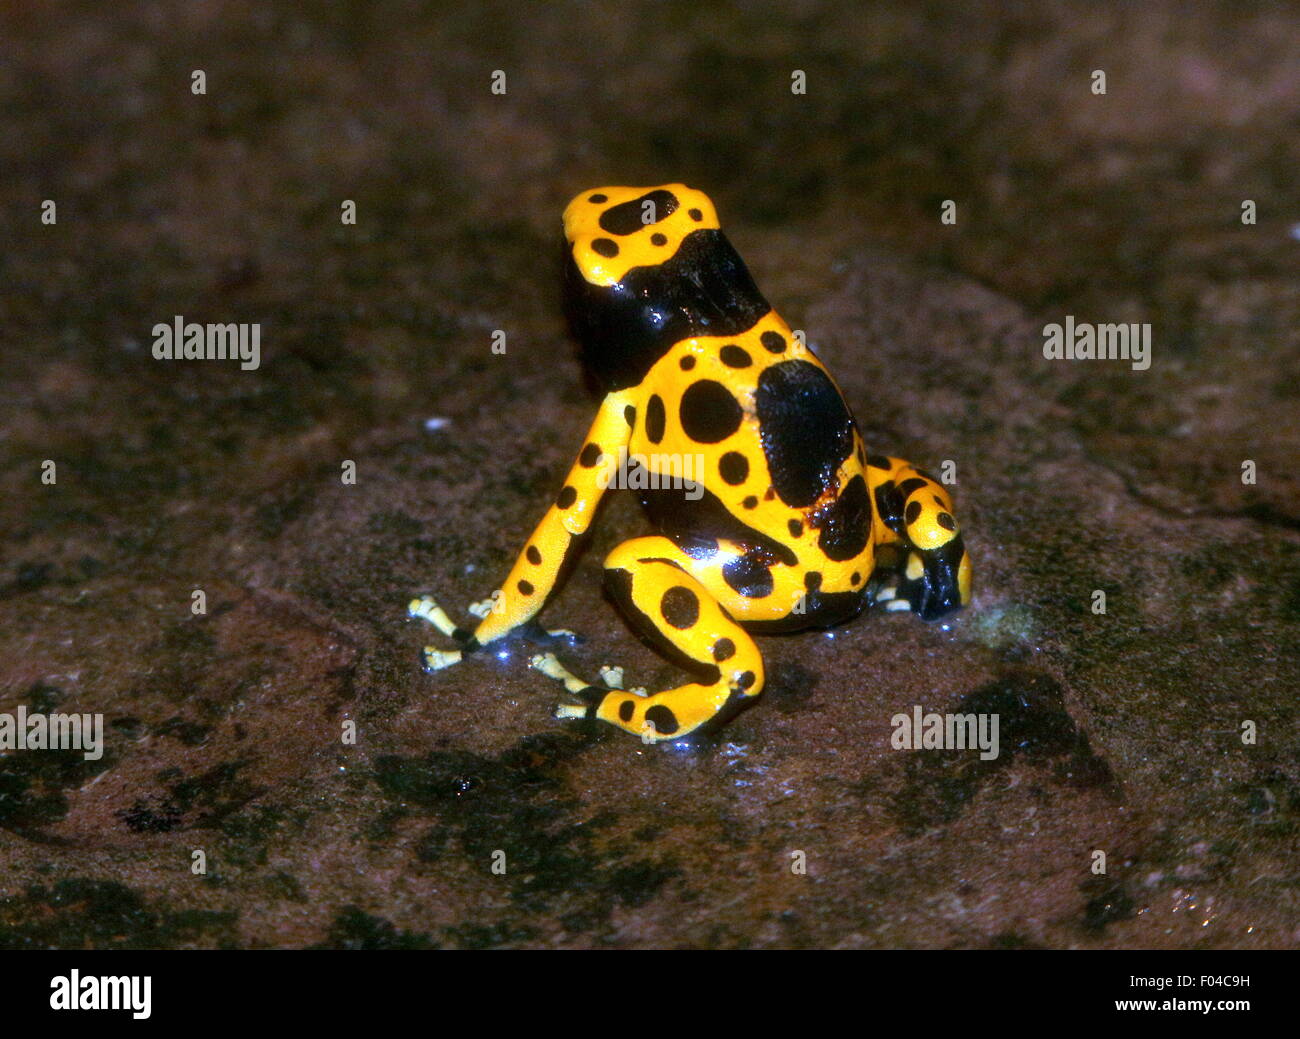 South American Yellow banded or yellow headed poison dart frog (Dendrobates leucomelas), a.k.a. Bumblebee poison frog Stock Photo